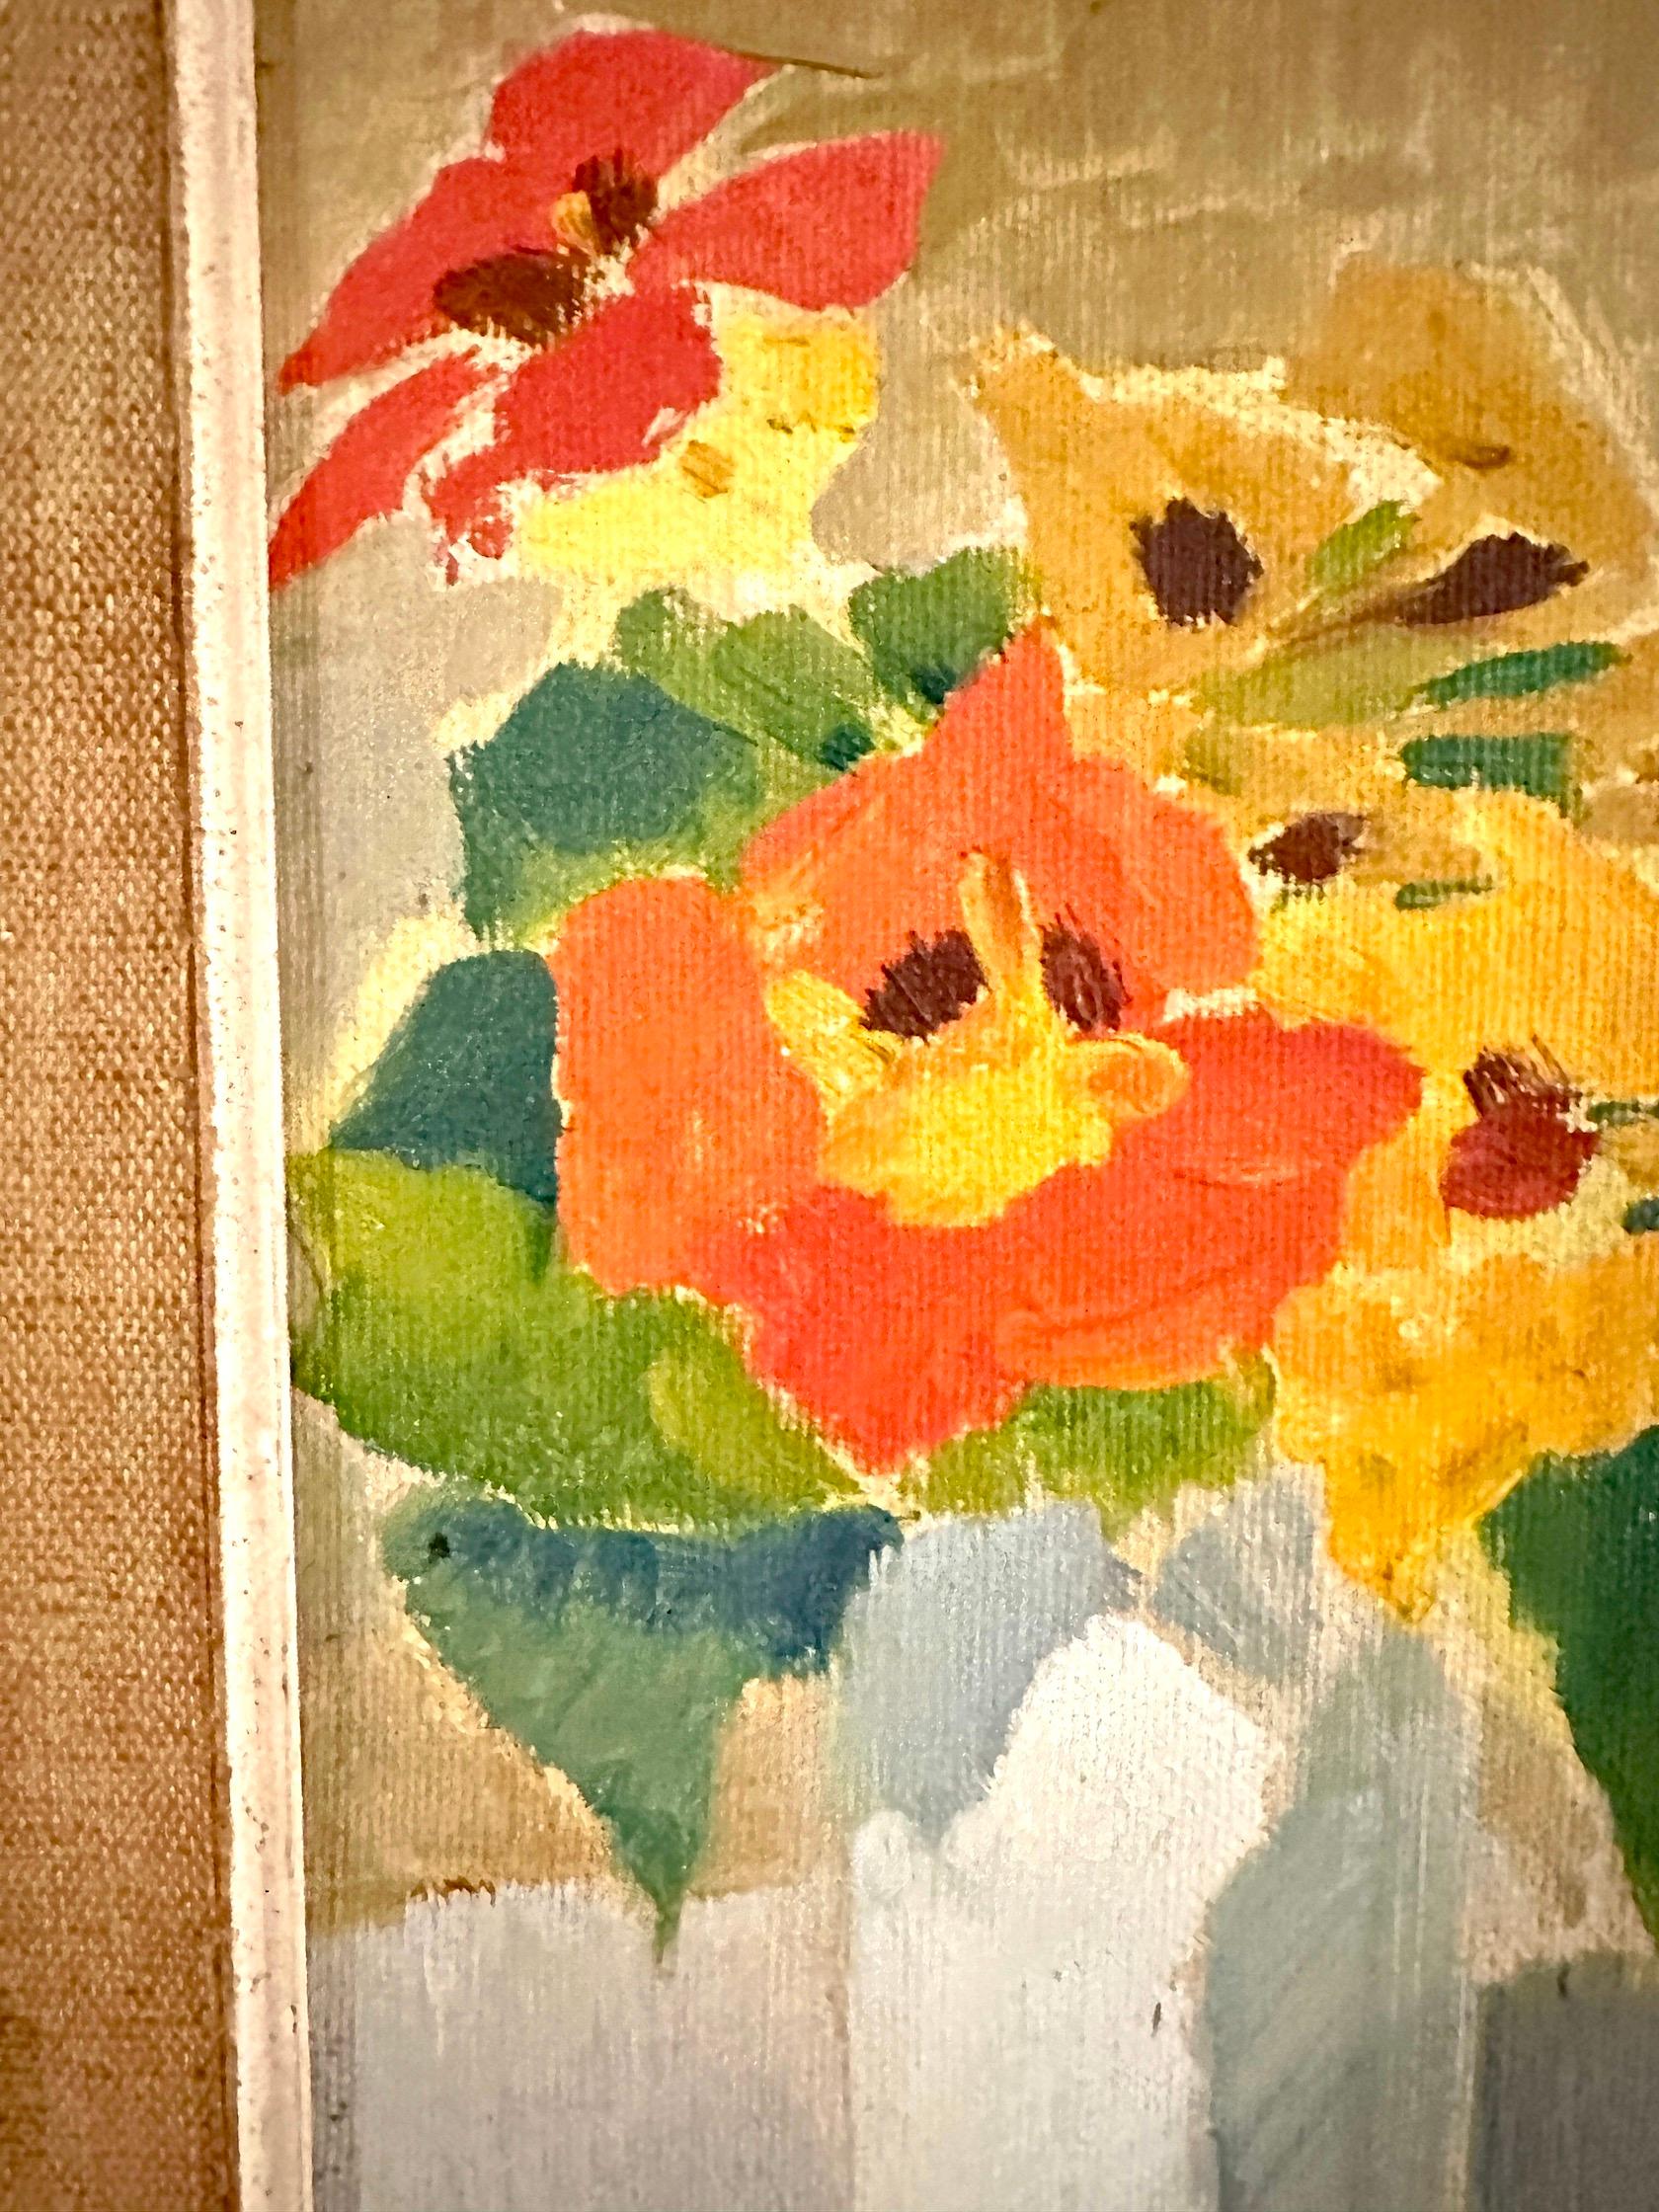 Anders Jönsson was a Swedish Impressionist & Modern sculptor who was born in 1907.

He painted landscapes, marine scenes and flowers amongst many other various subjects always with a light palette and great use ion color. 
This example is a